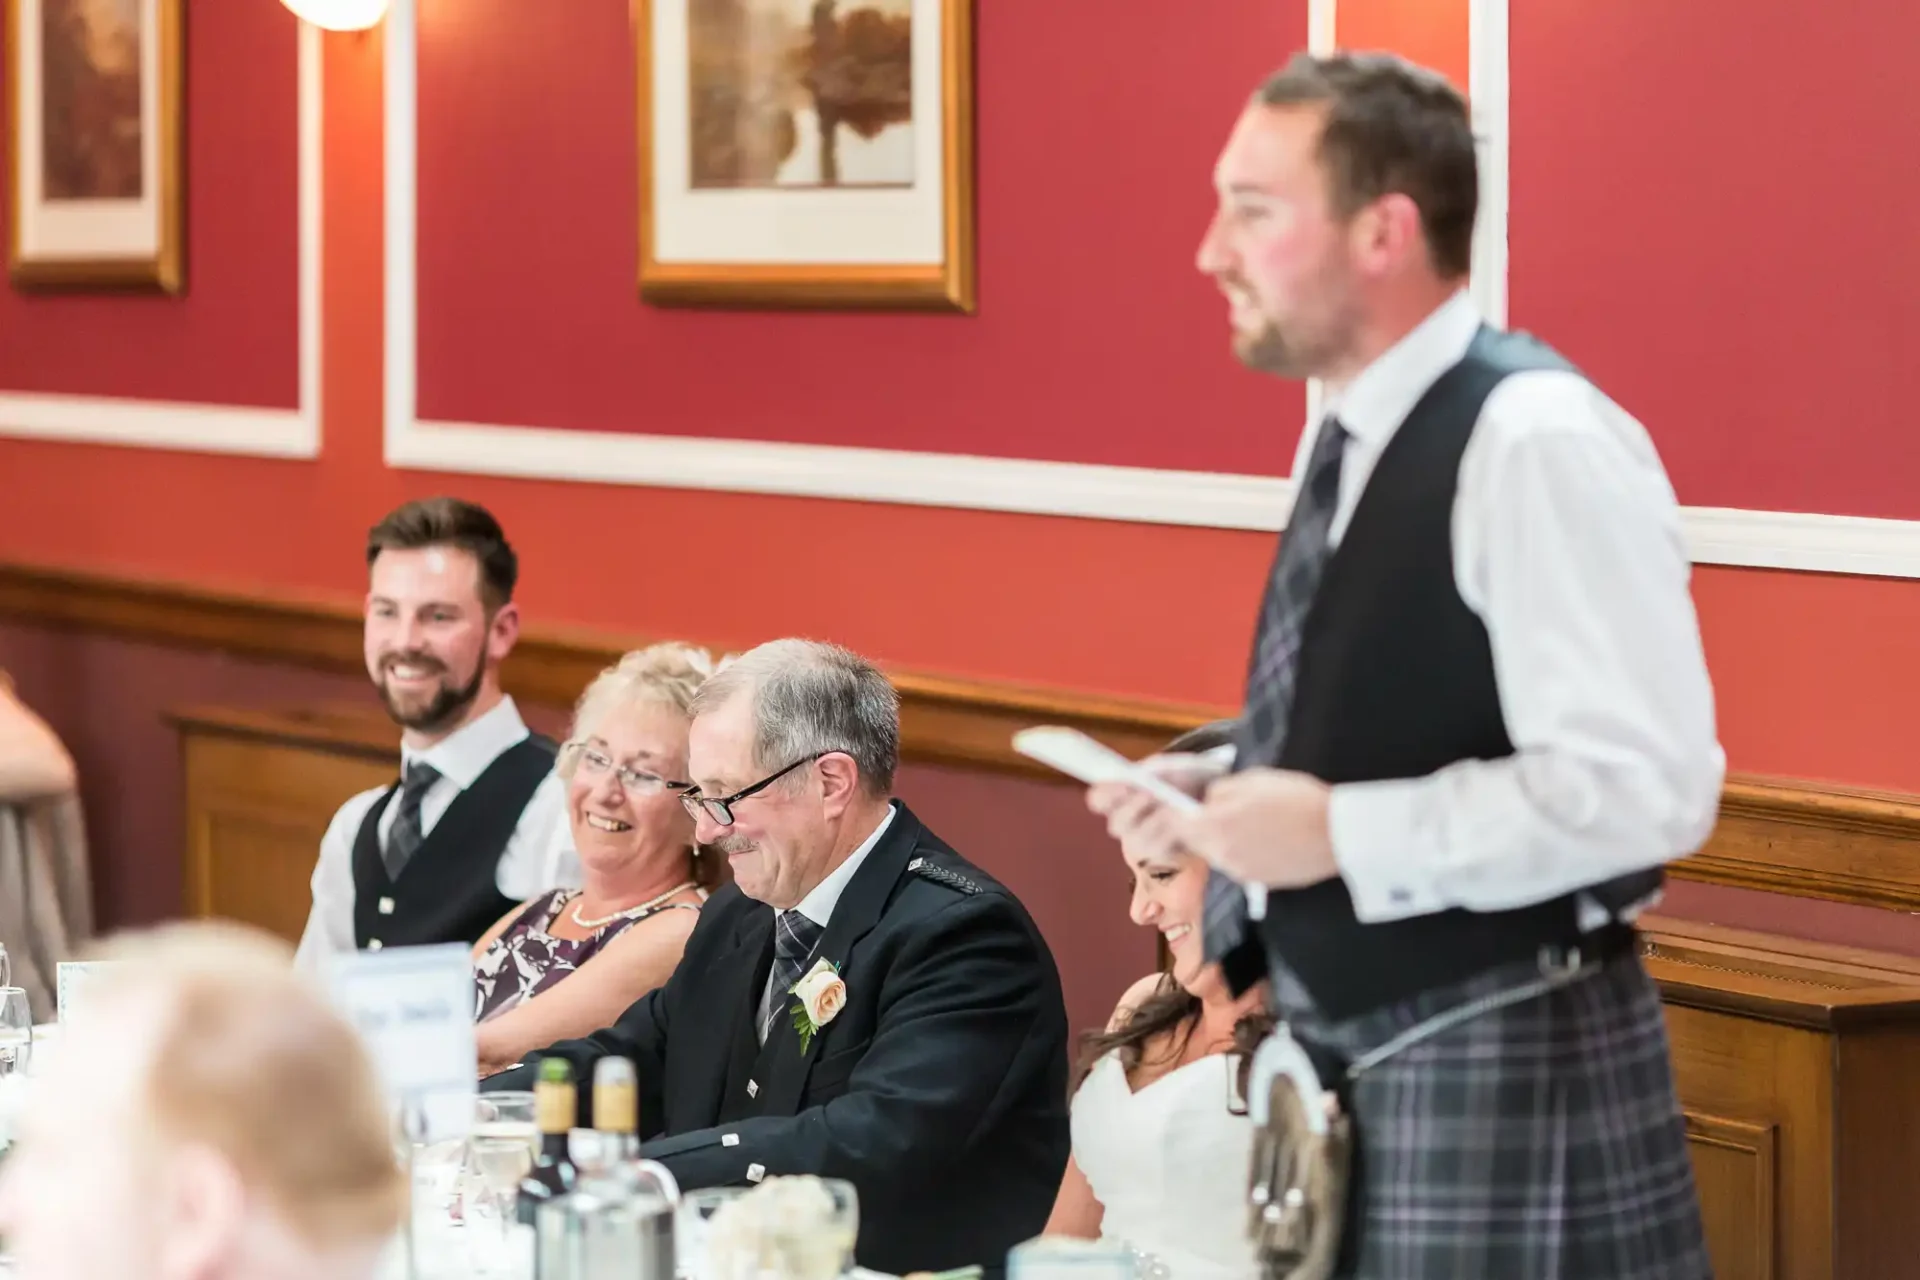 Man in kilt serving dinner to guests at a formal event, with a smiling elderly man, woman, and another guest seated at a table.